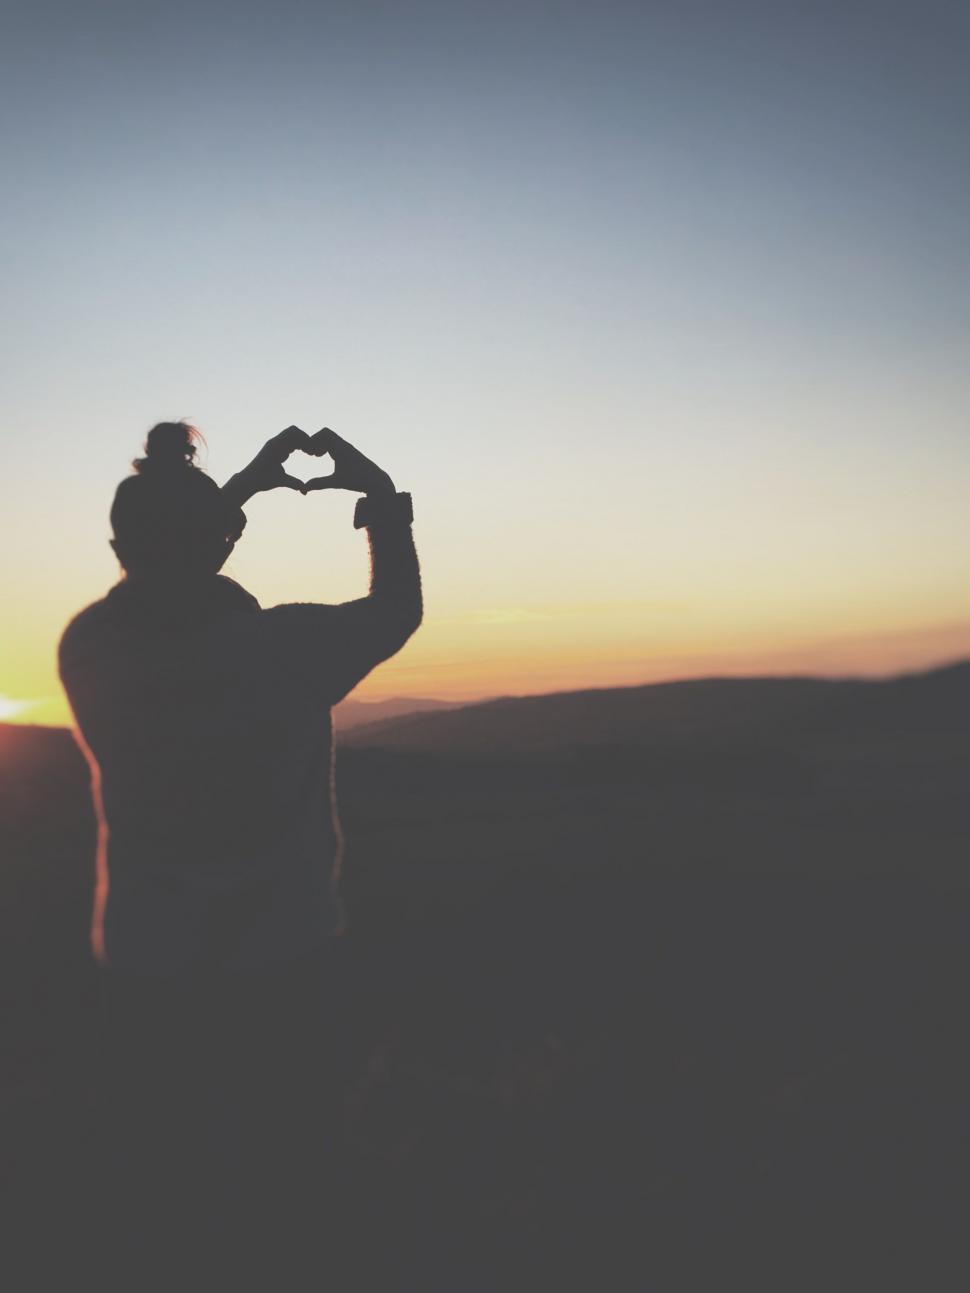 Free Image of Man Making Heart Shape With Hands 